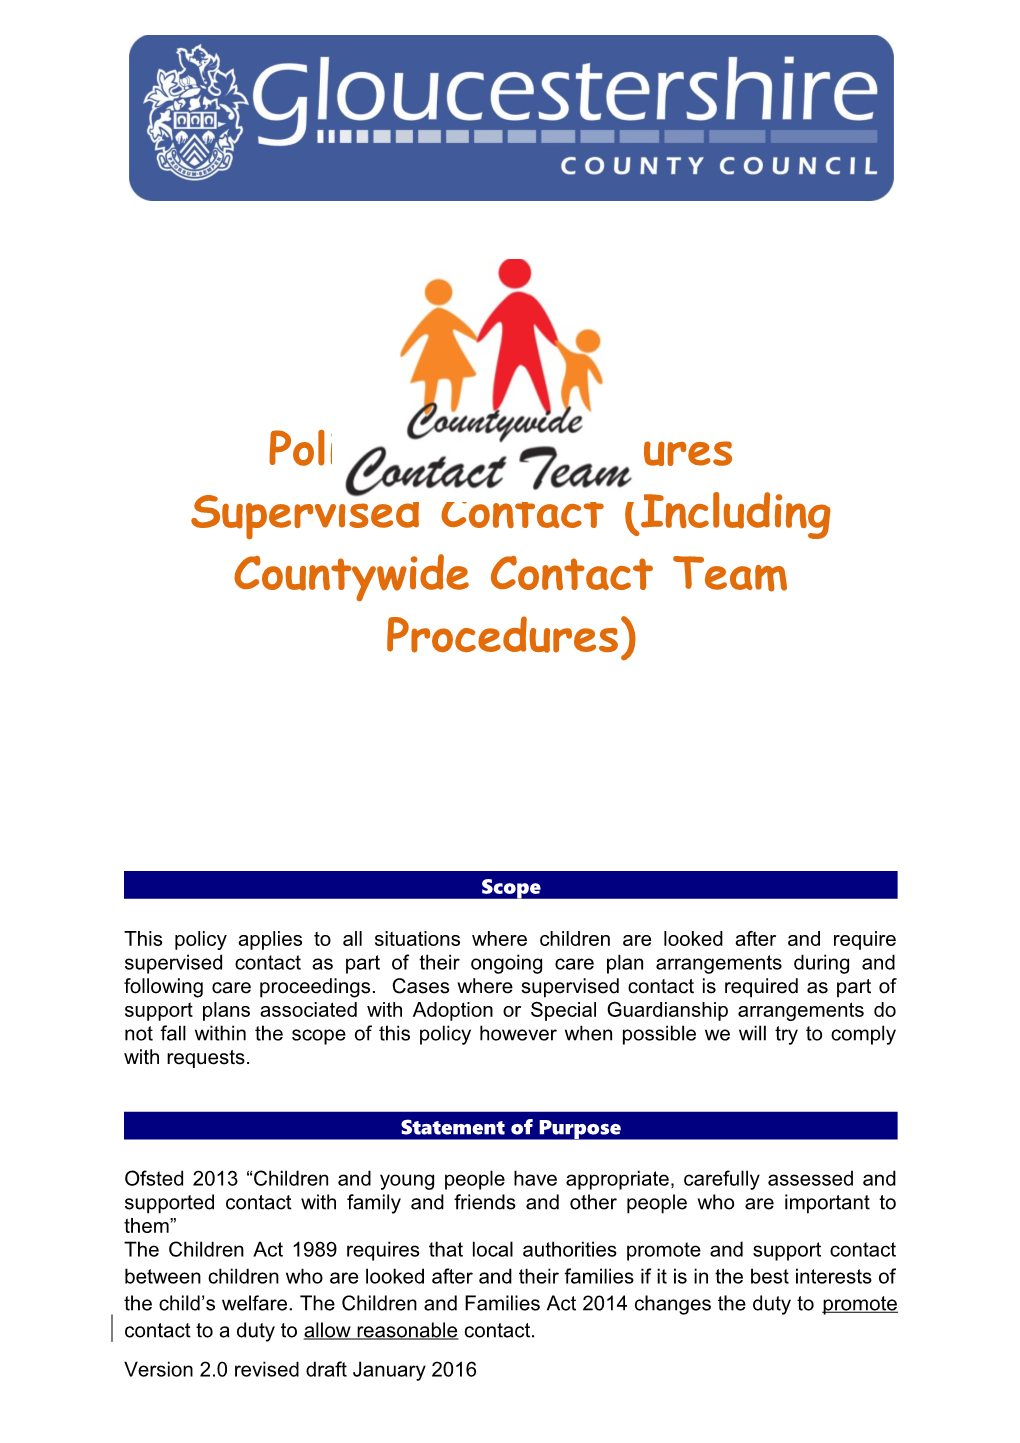 Supervised Contact (Including Countywide Contact Team Procedures)